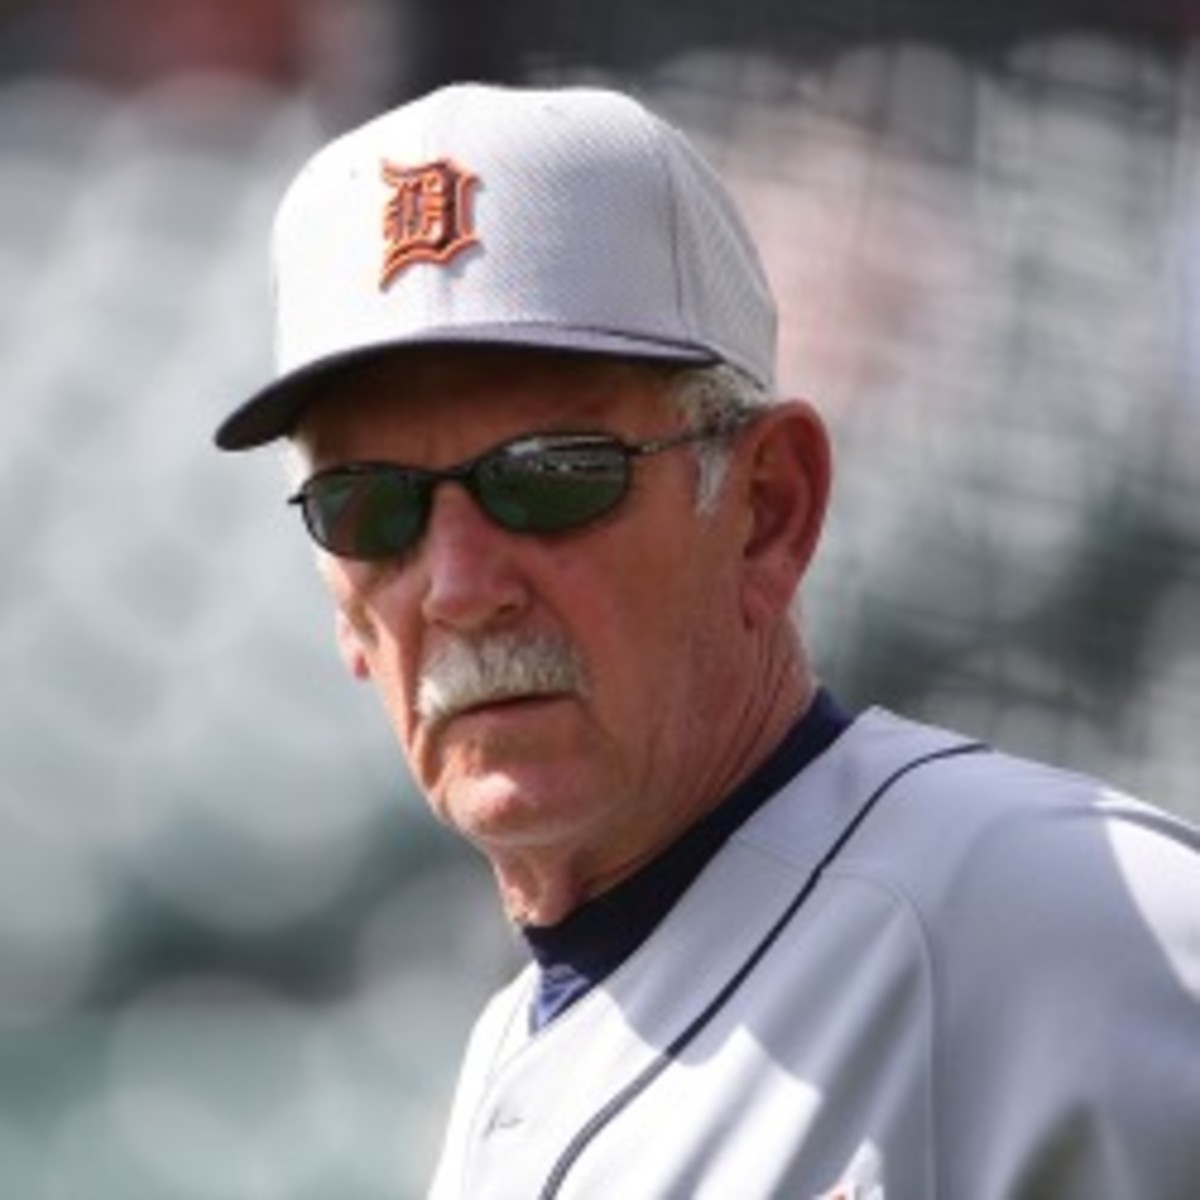 68-year-old Tigers manager Jim Leyland says he isn't retiring anytime soon. (Leon Halip/Getty Images)